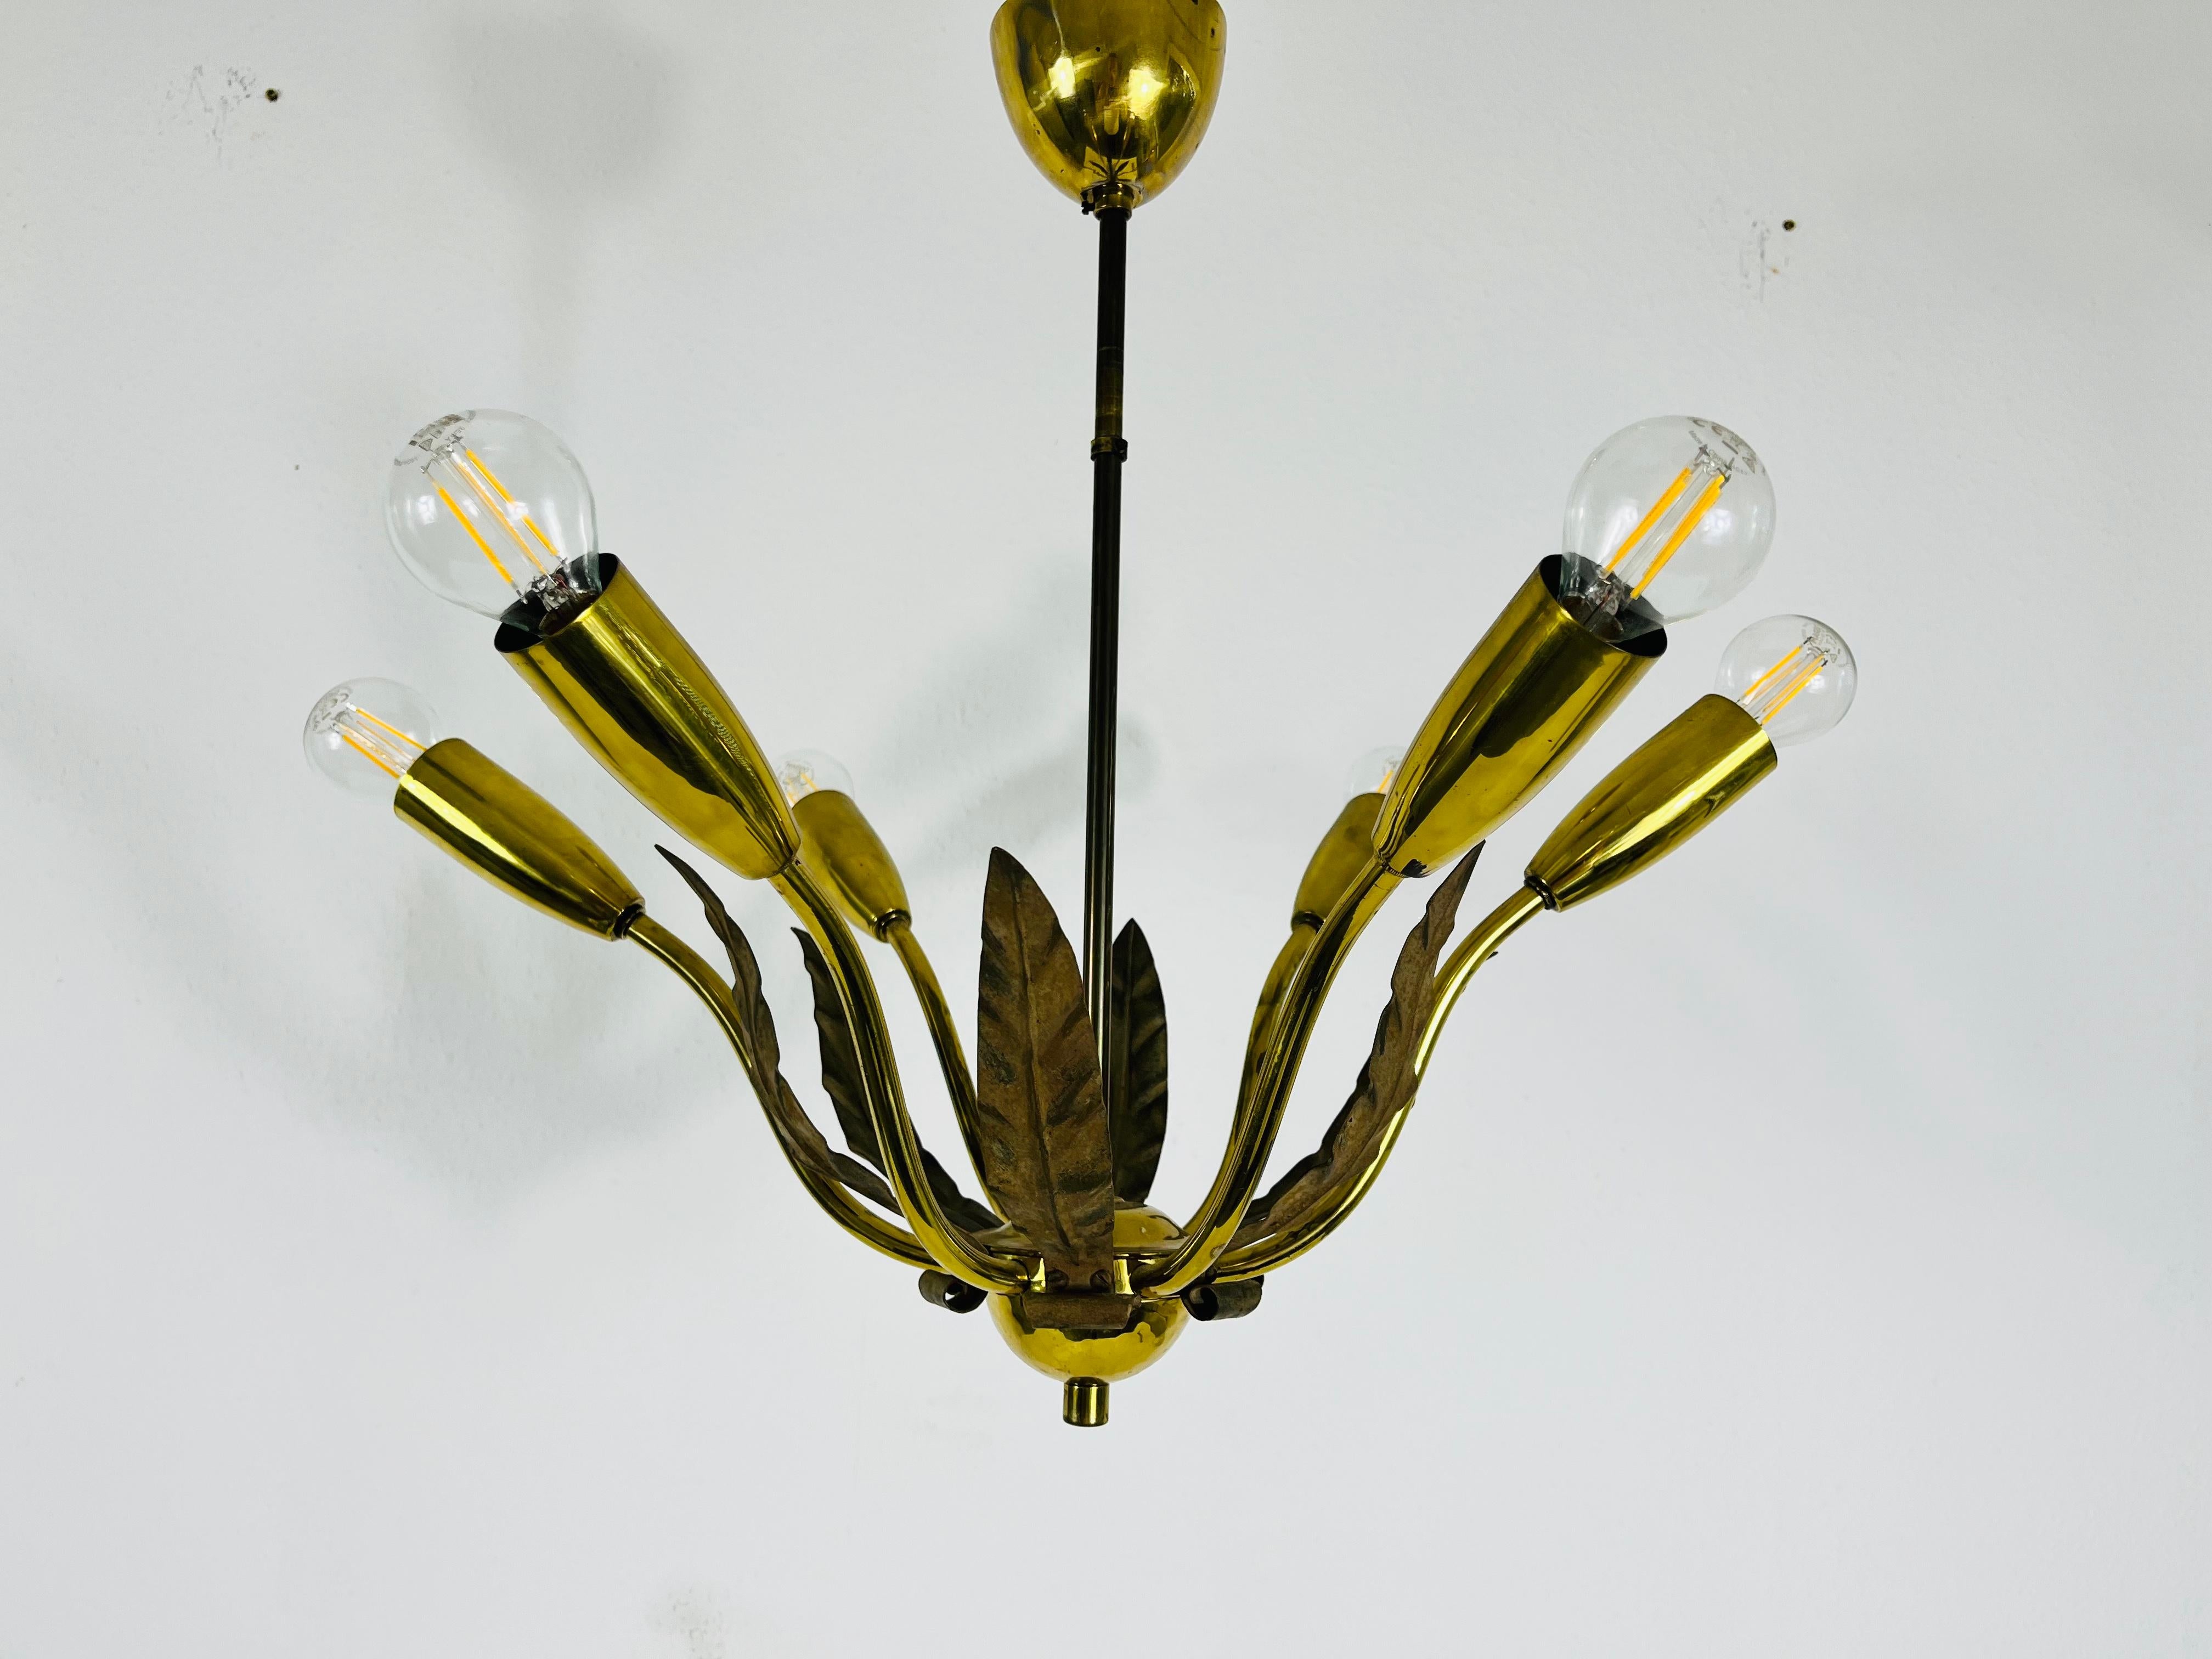 A midcentury chandelier made in Germany in the 1960s. It is fascinating with its rare arms and elegant design.

The light requires eight E14 light bulbs. Works with both 220V/120V. Good vintage condition.

Free worldwide express shipping.